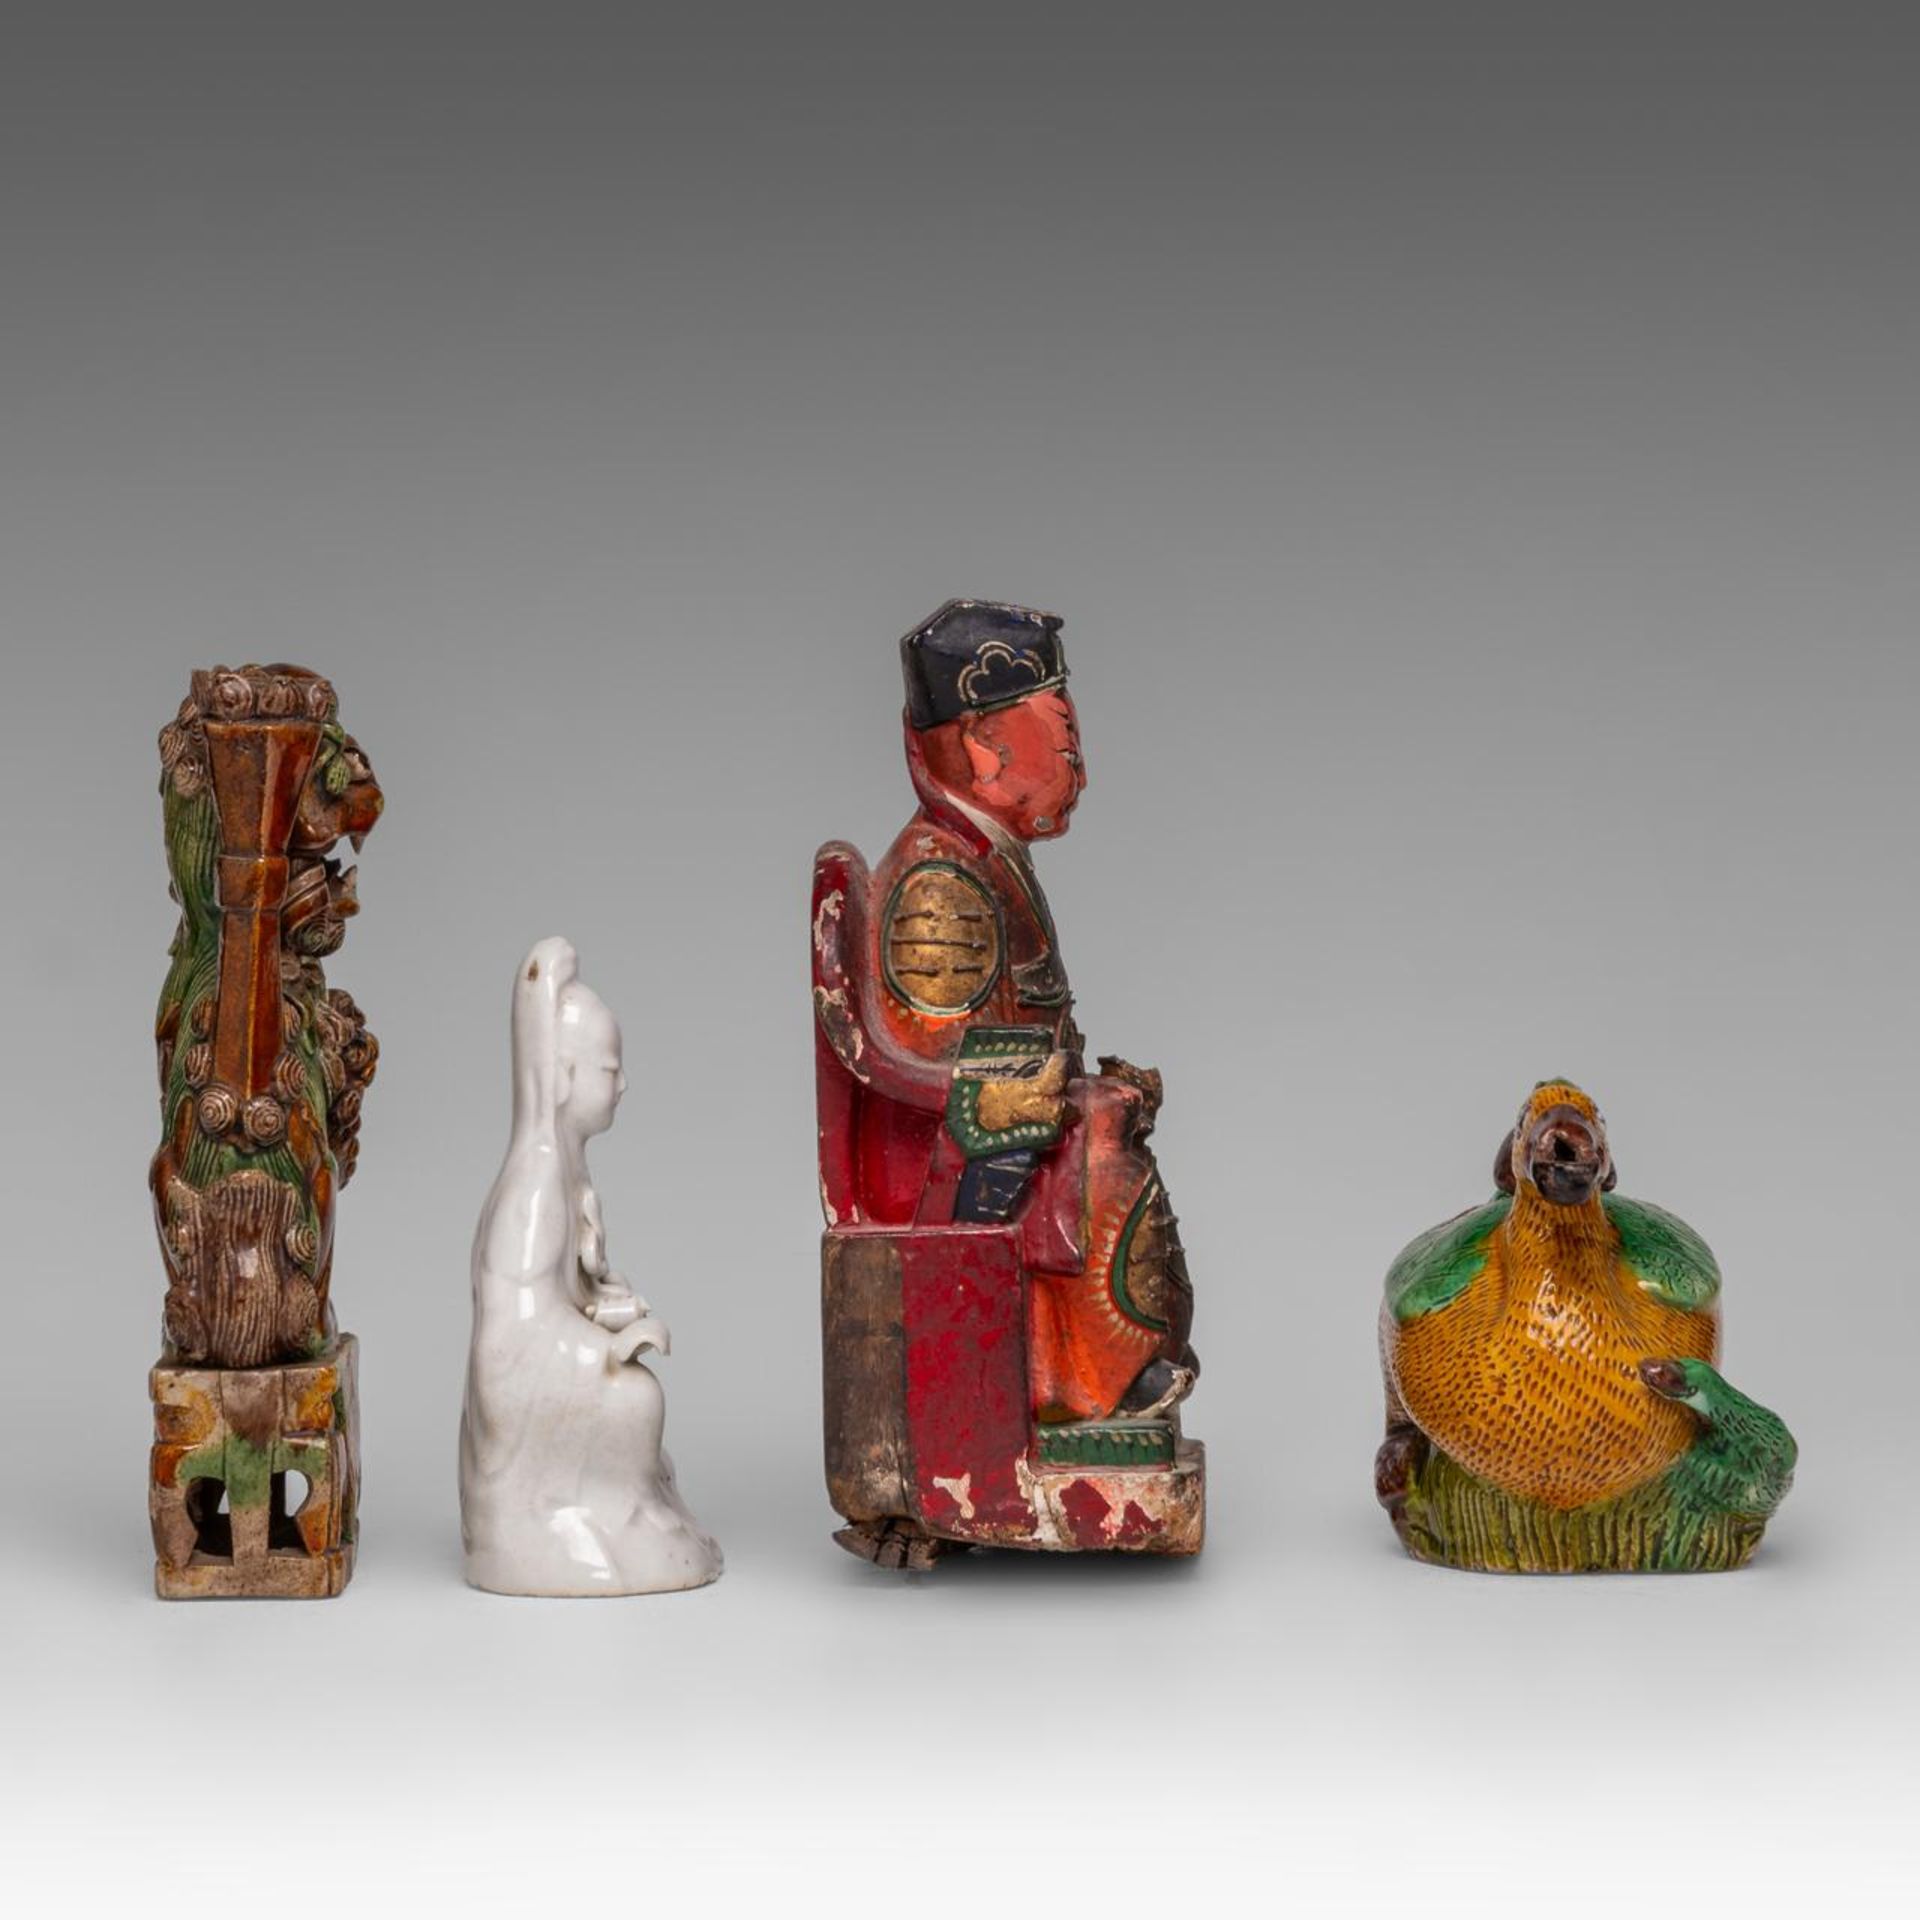 A small collection of Chinese altar ware, Kangxi - Republic period, tallest H 22 cm - Image 5 of 7